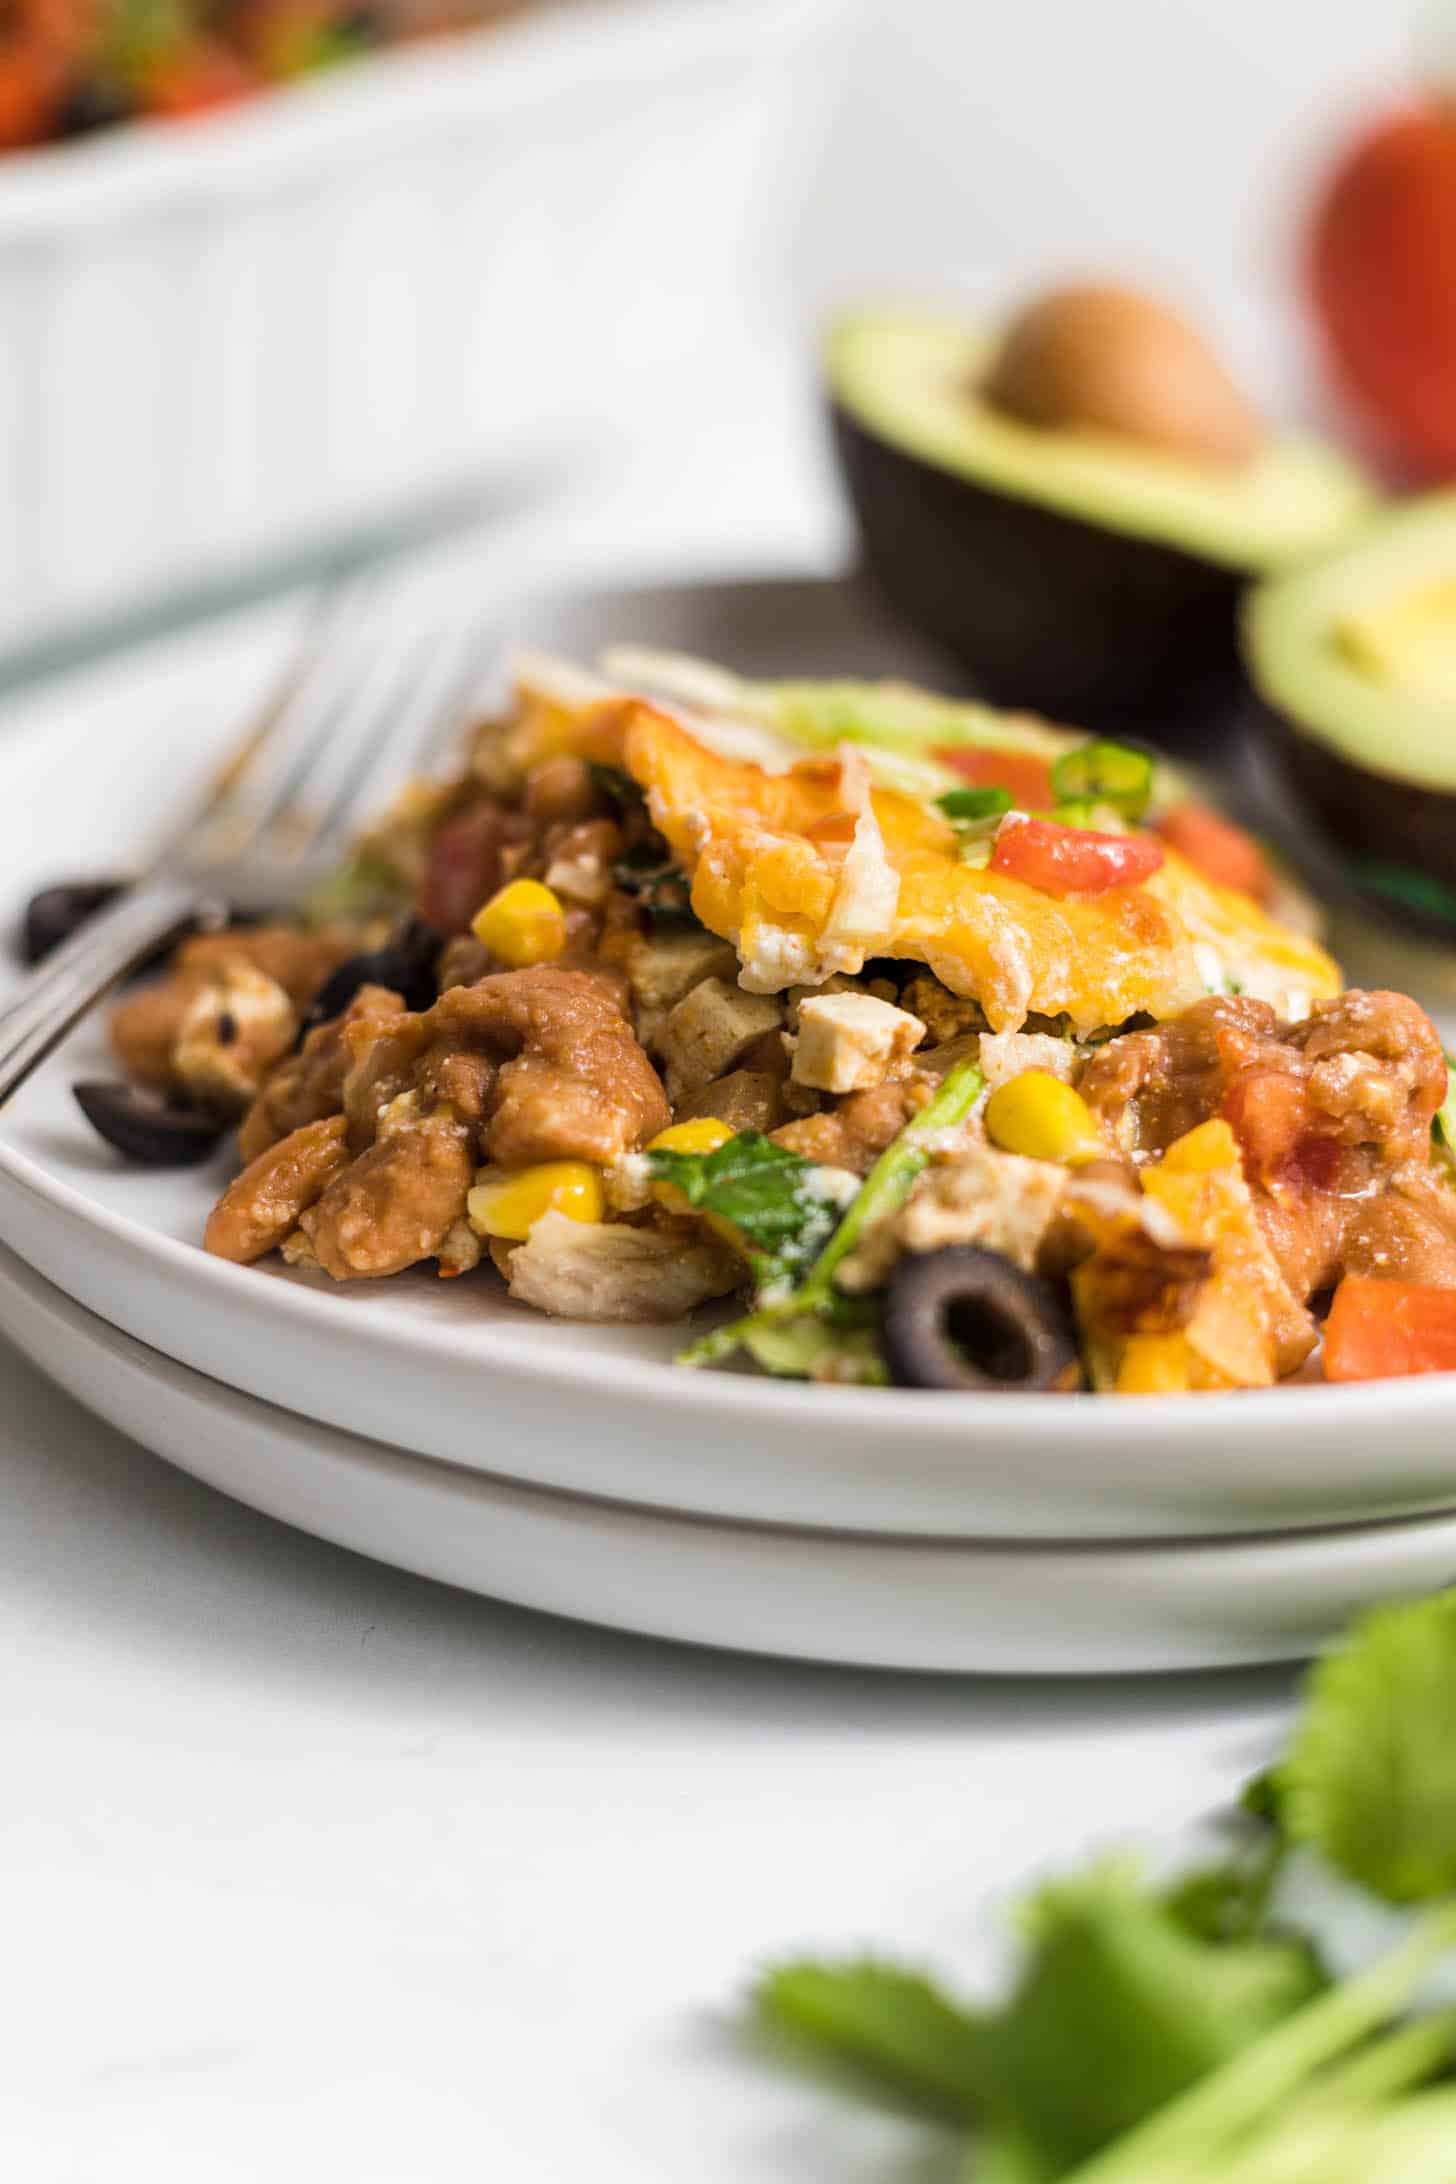 A serving of taco casserole on a plate.